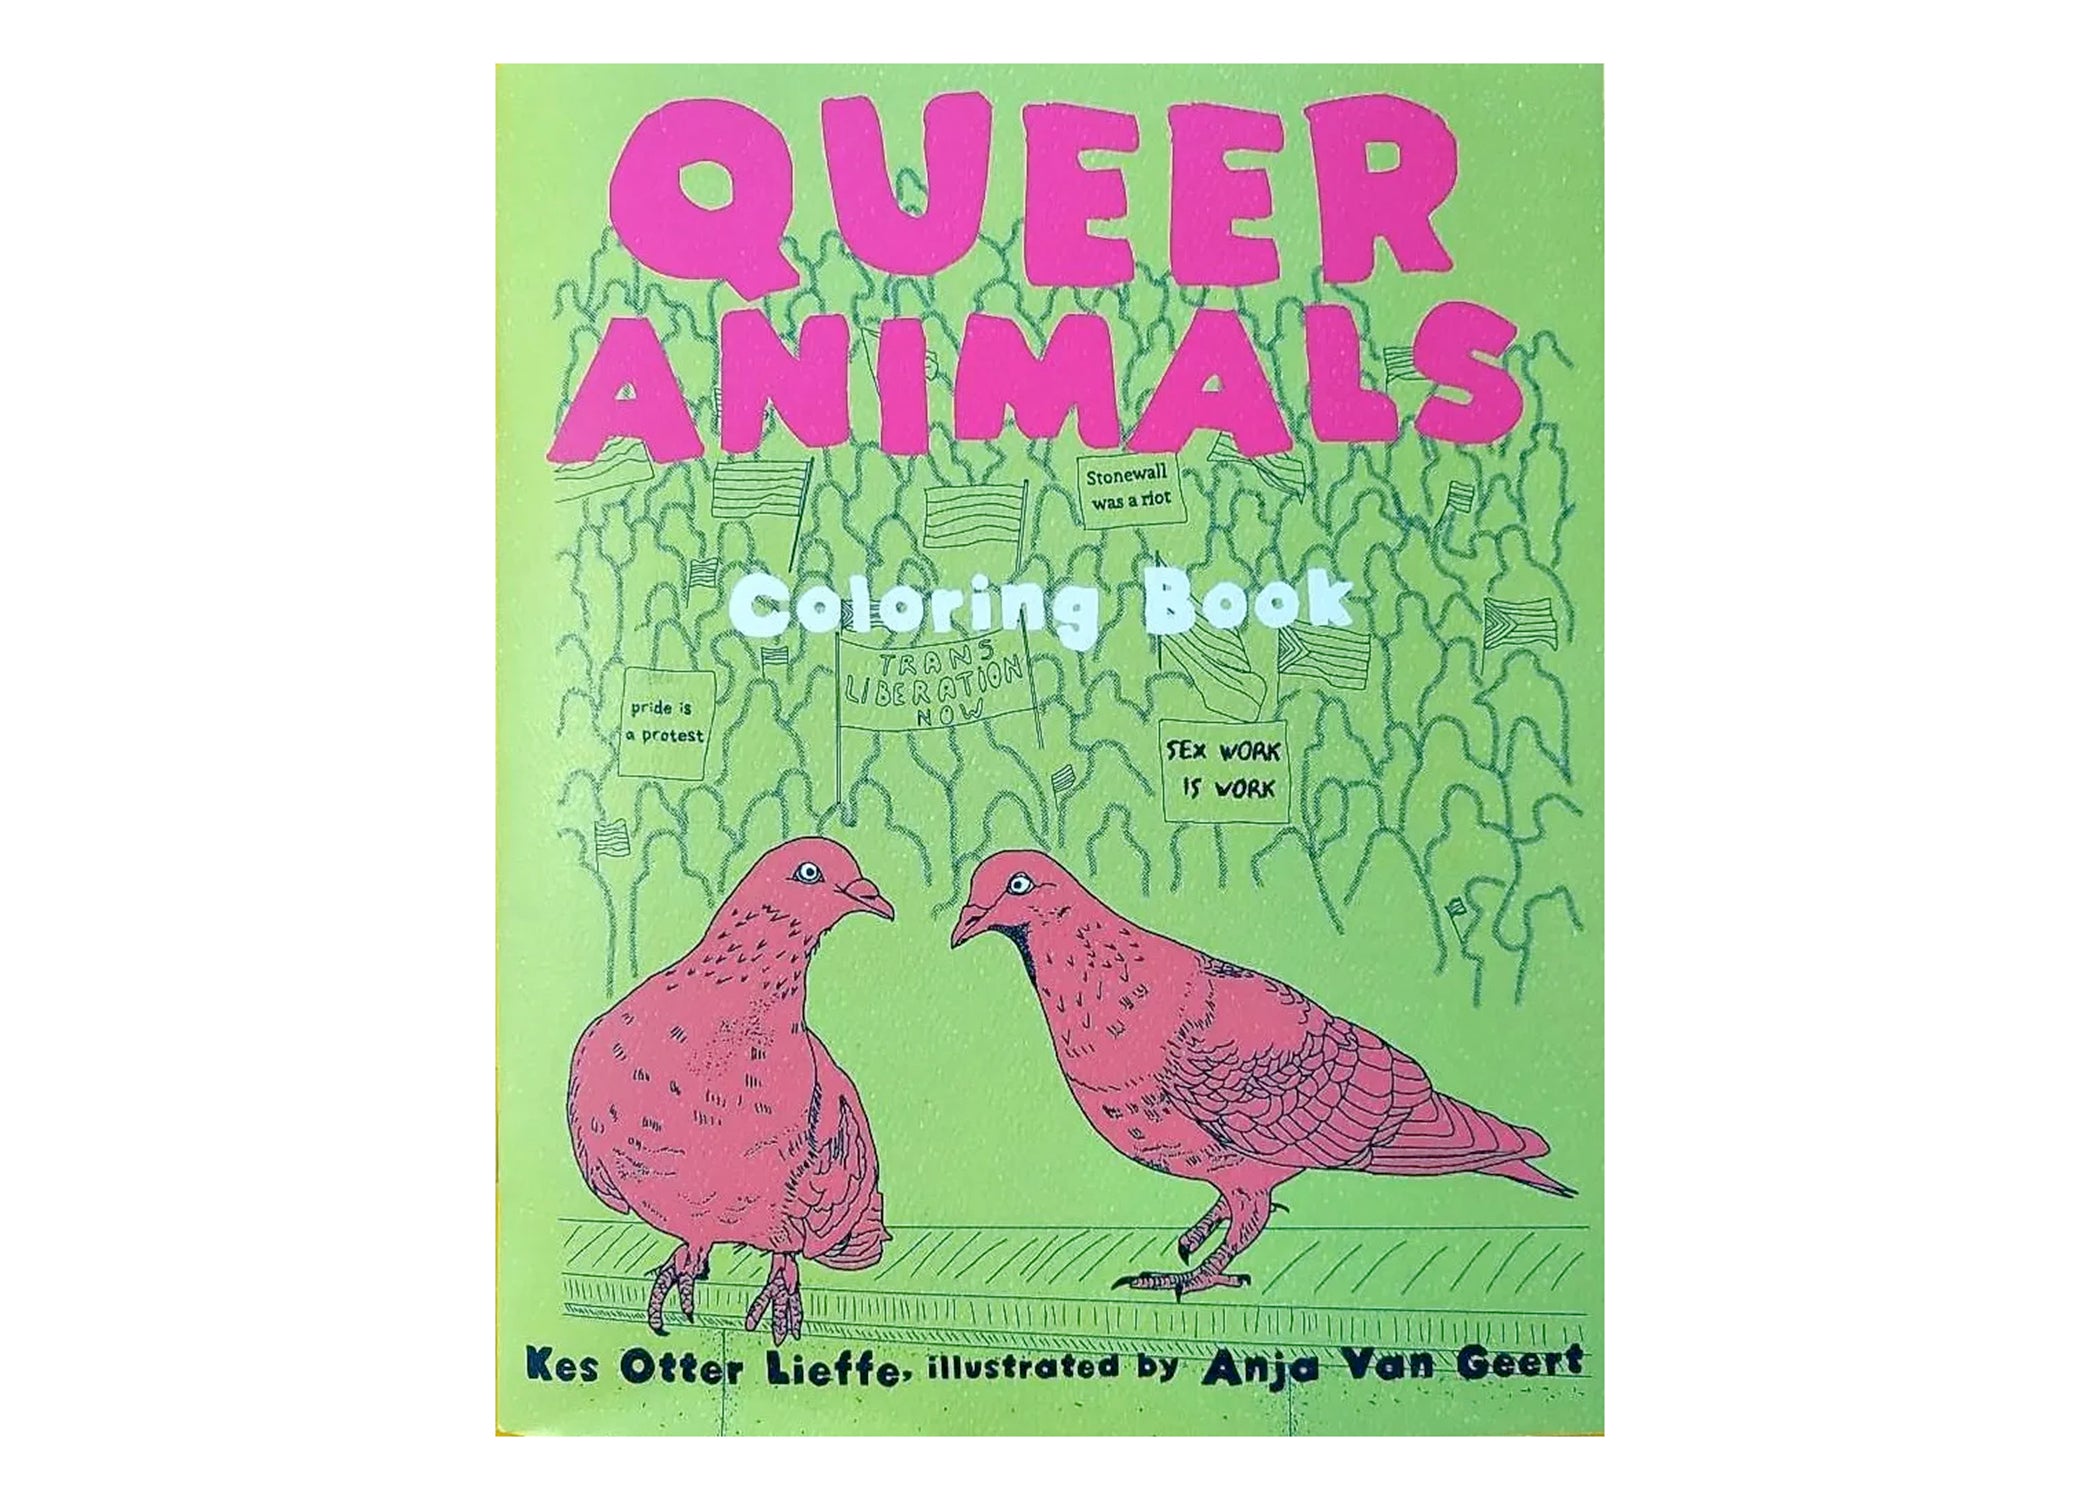 The Big Book of Queer Stickers – Ash + Chess